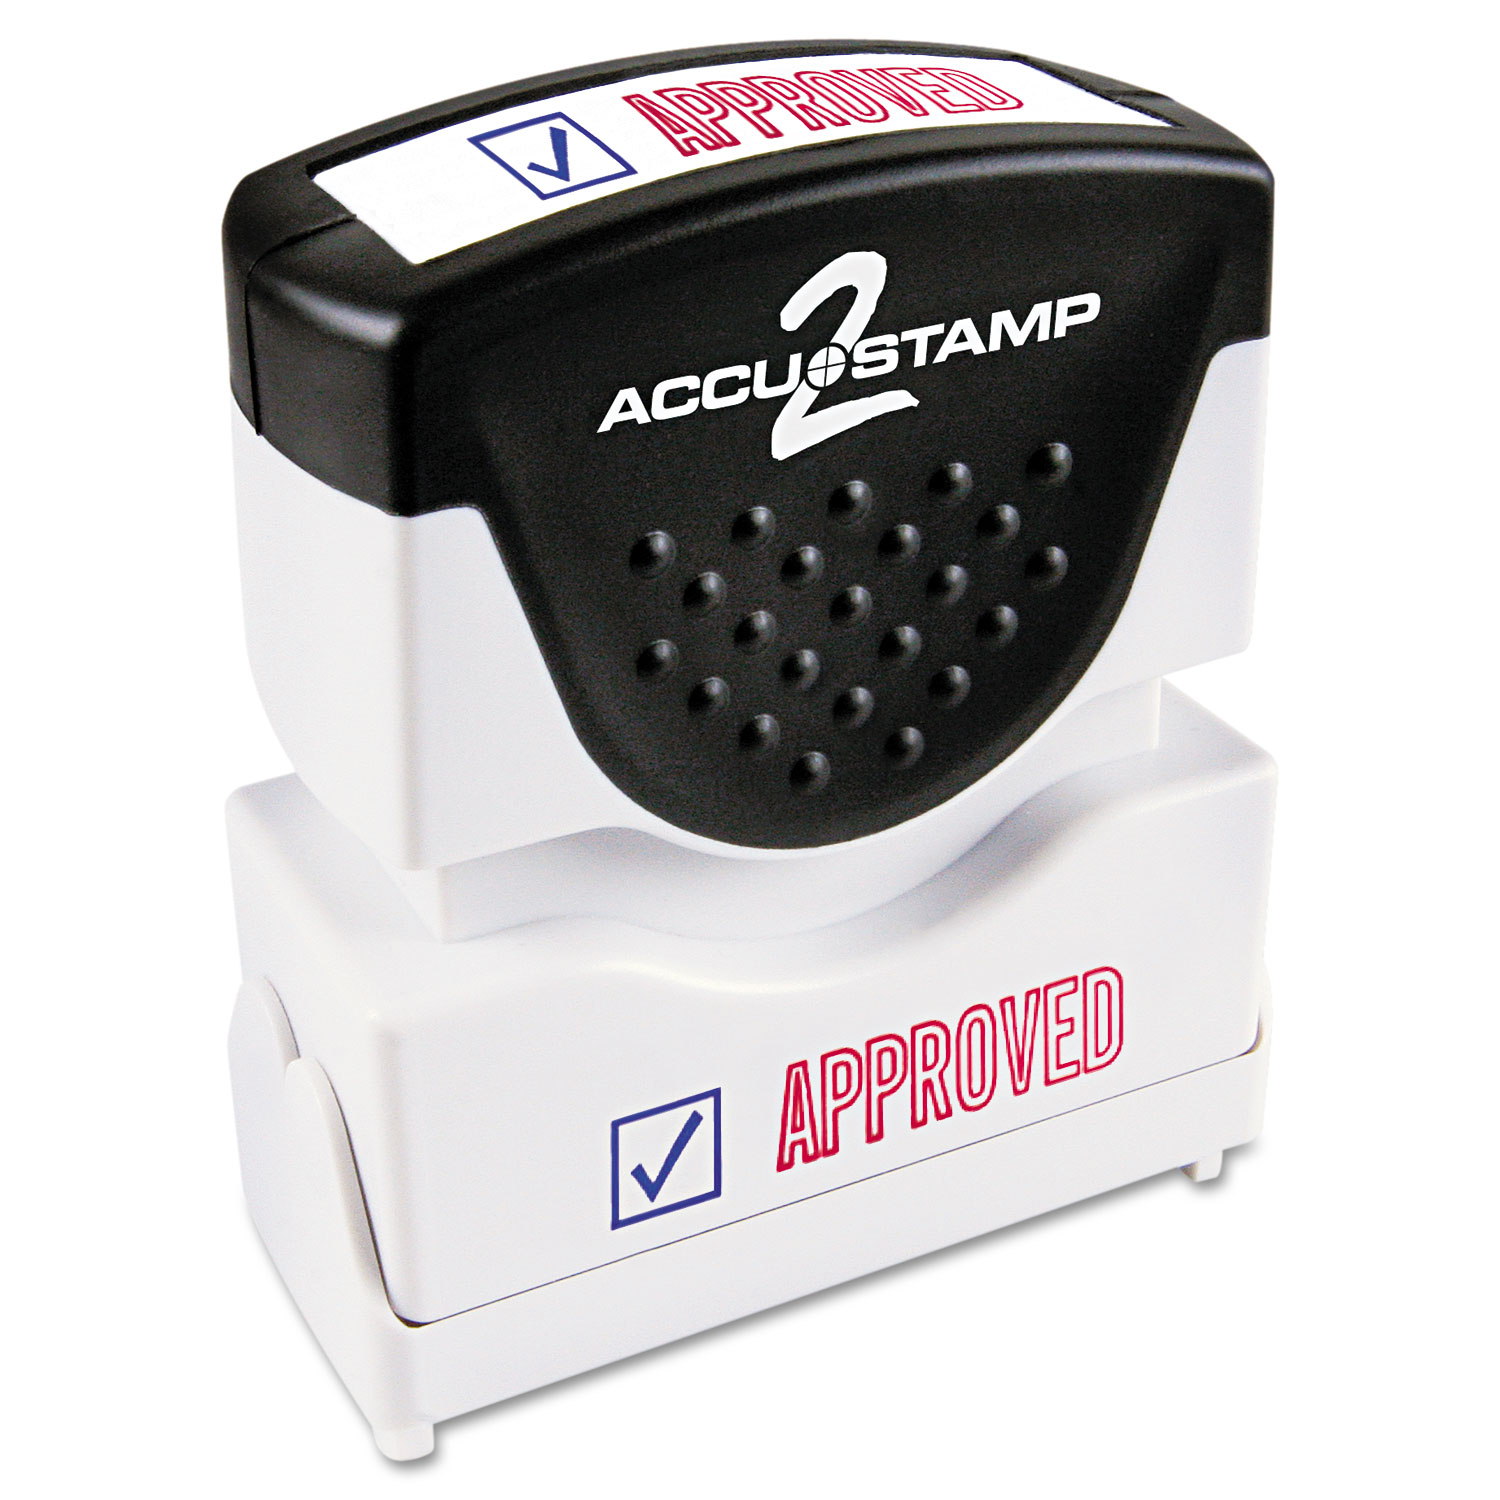  ACCUSTAMP2 035525 Pre-Inked Shutter Stamp, Red/Blue, APPROVED, 1 5/8 x 1/2 (COS035525) 